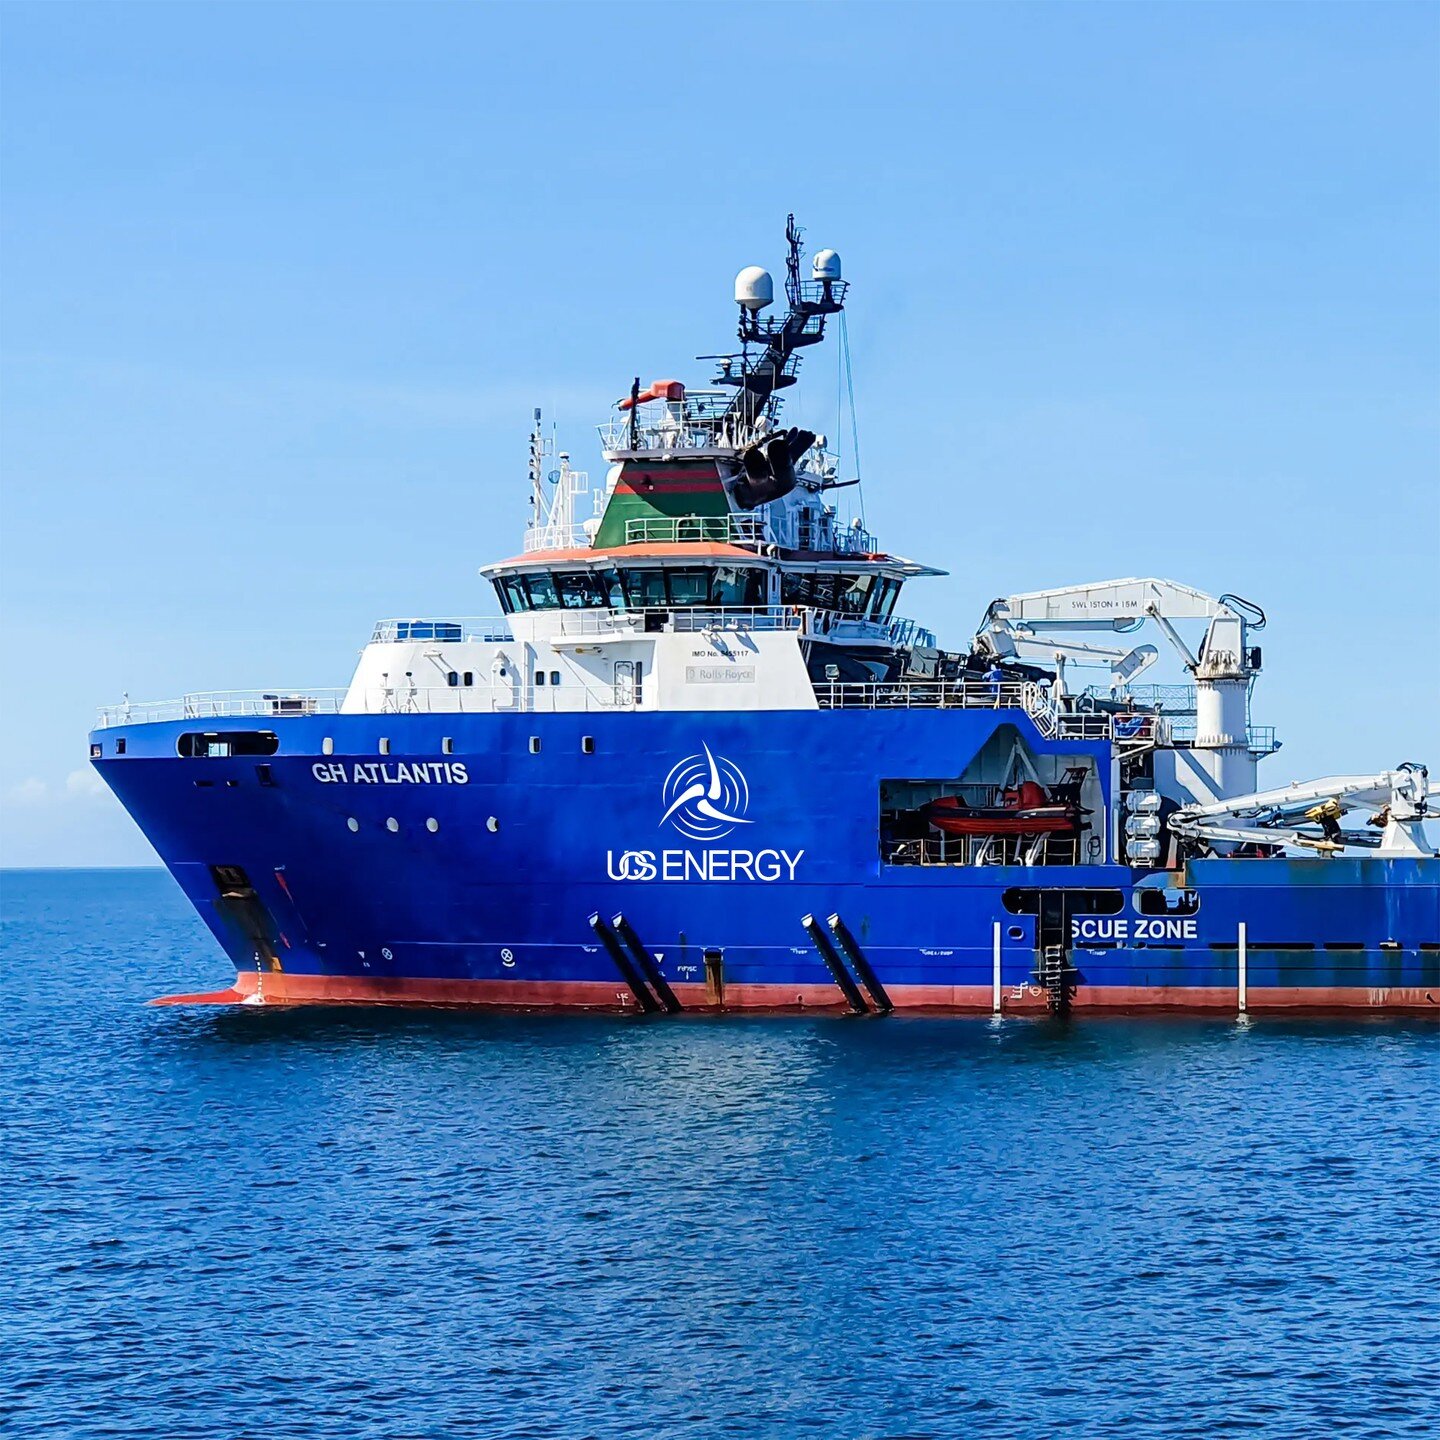 UOS is a leading service provider to the global offshore industry, excelling in the management and operation of support vessels. UOS is one of many international companies I had the pleasure of working with.
✏️ ⠀
Follow @designbykeri on Instagram, Fa